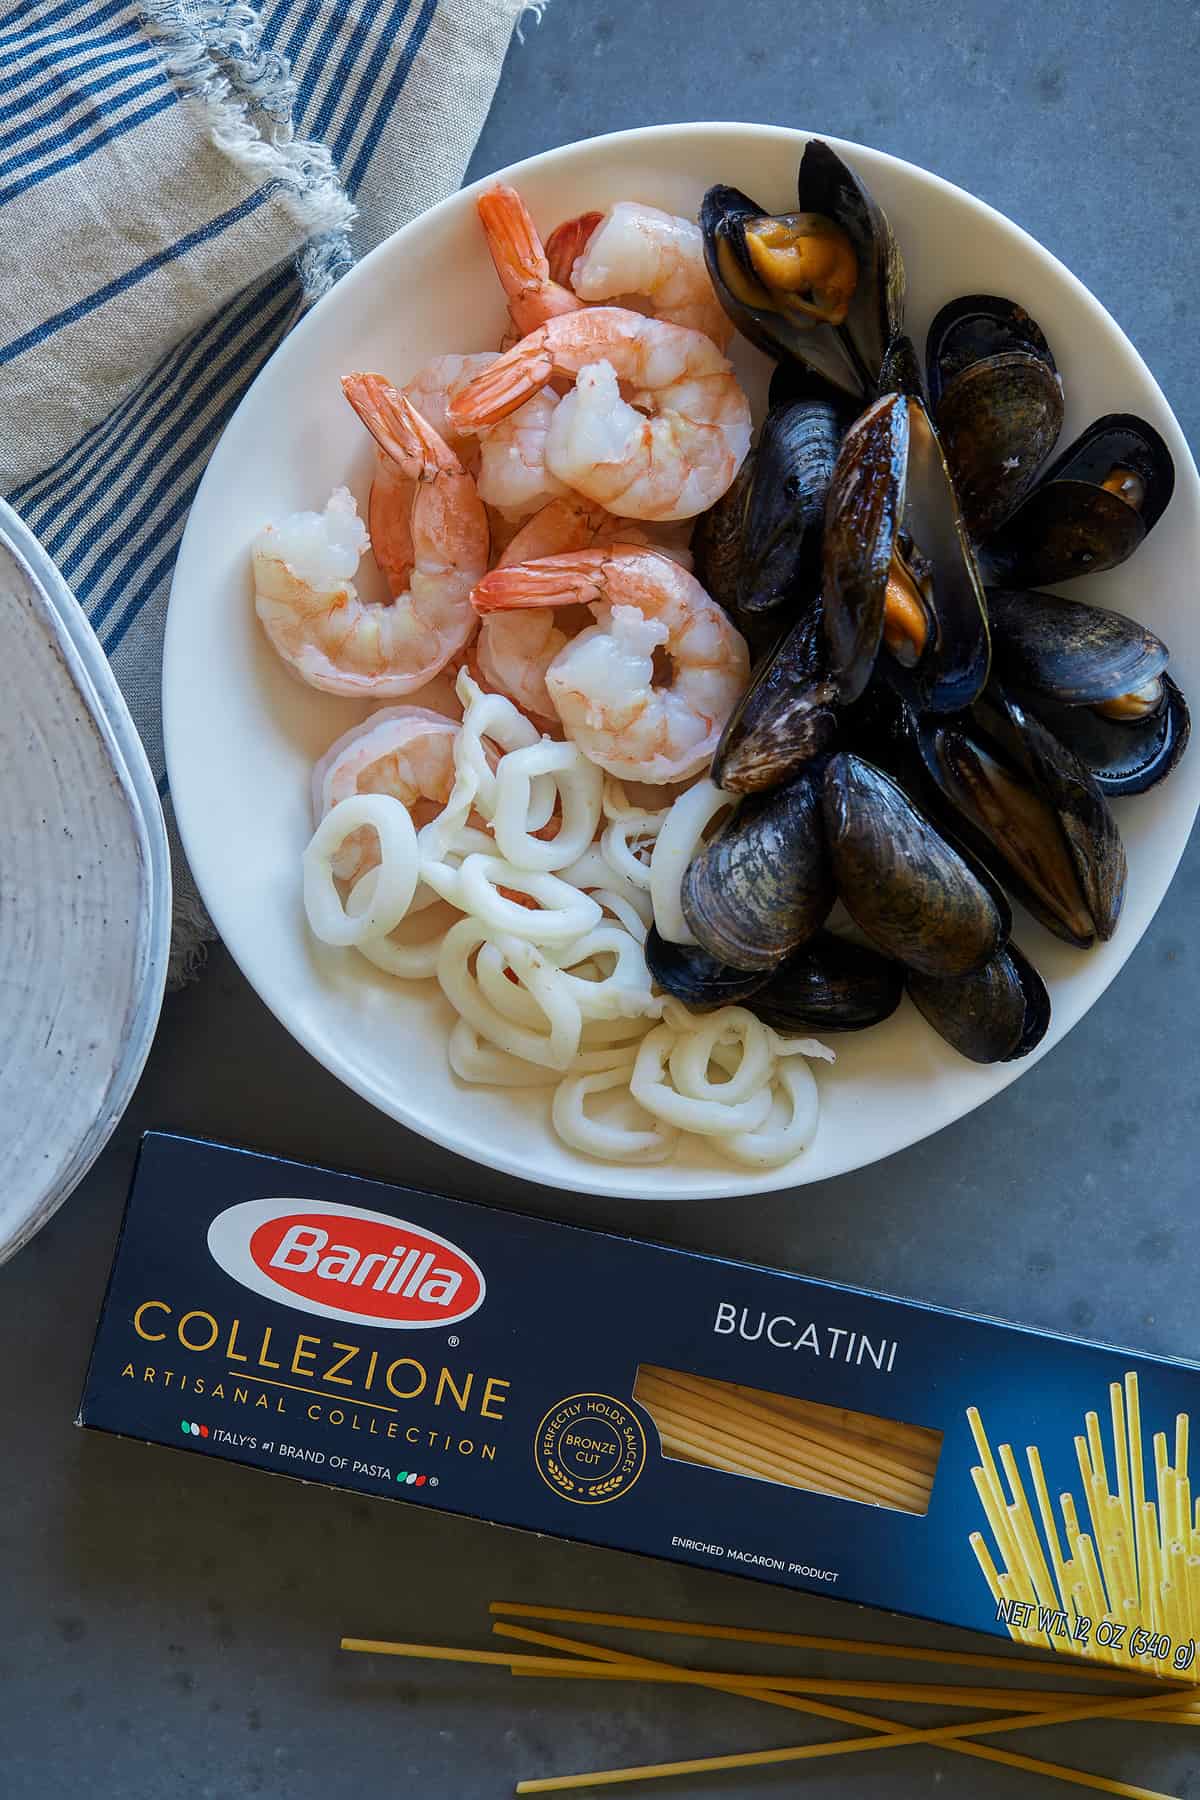 Ingredients for seafood carbonara in a bowl next to a box of Barilla Collezione Bucatini.